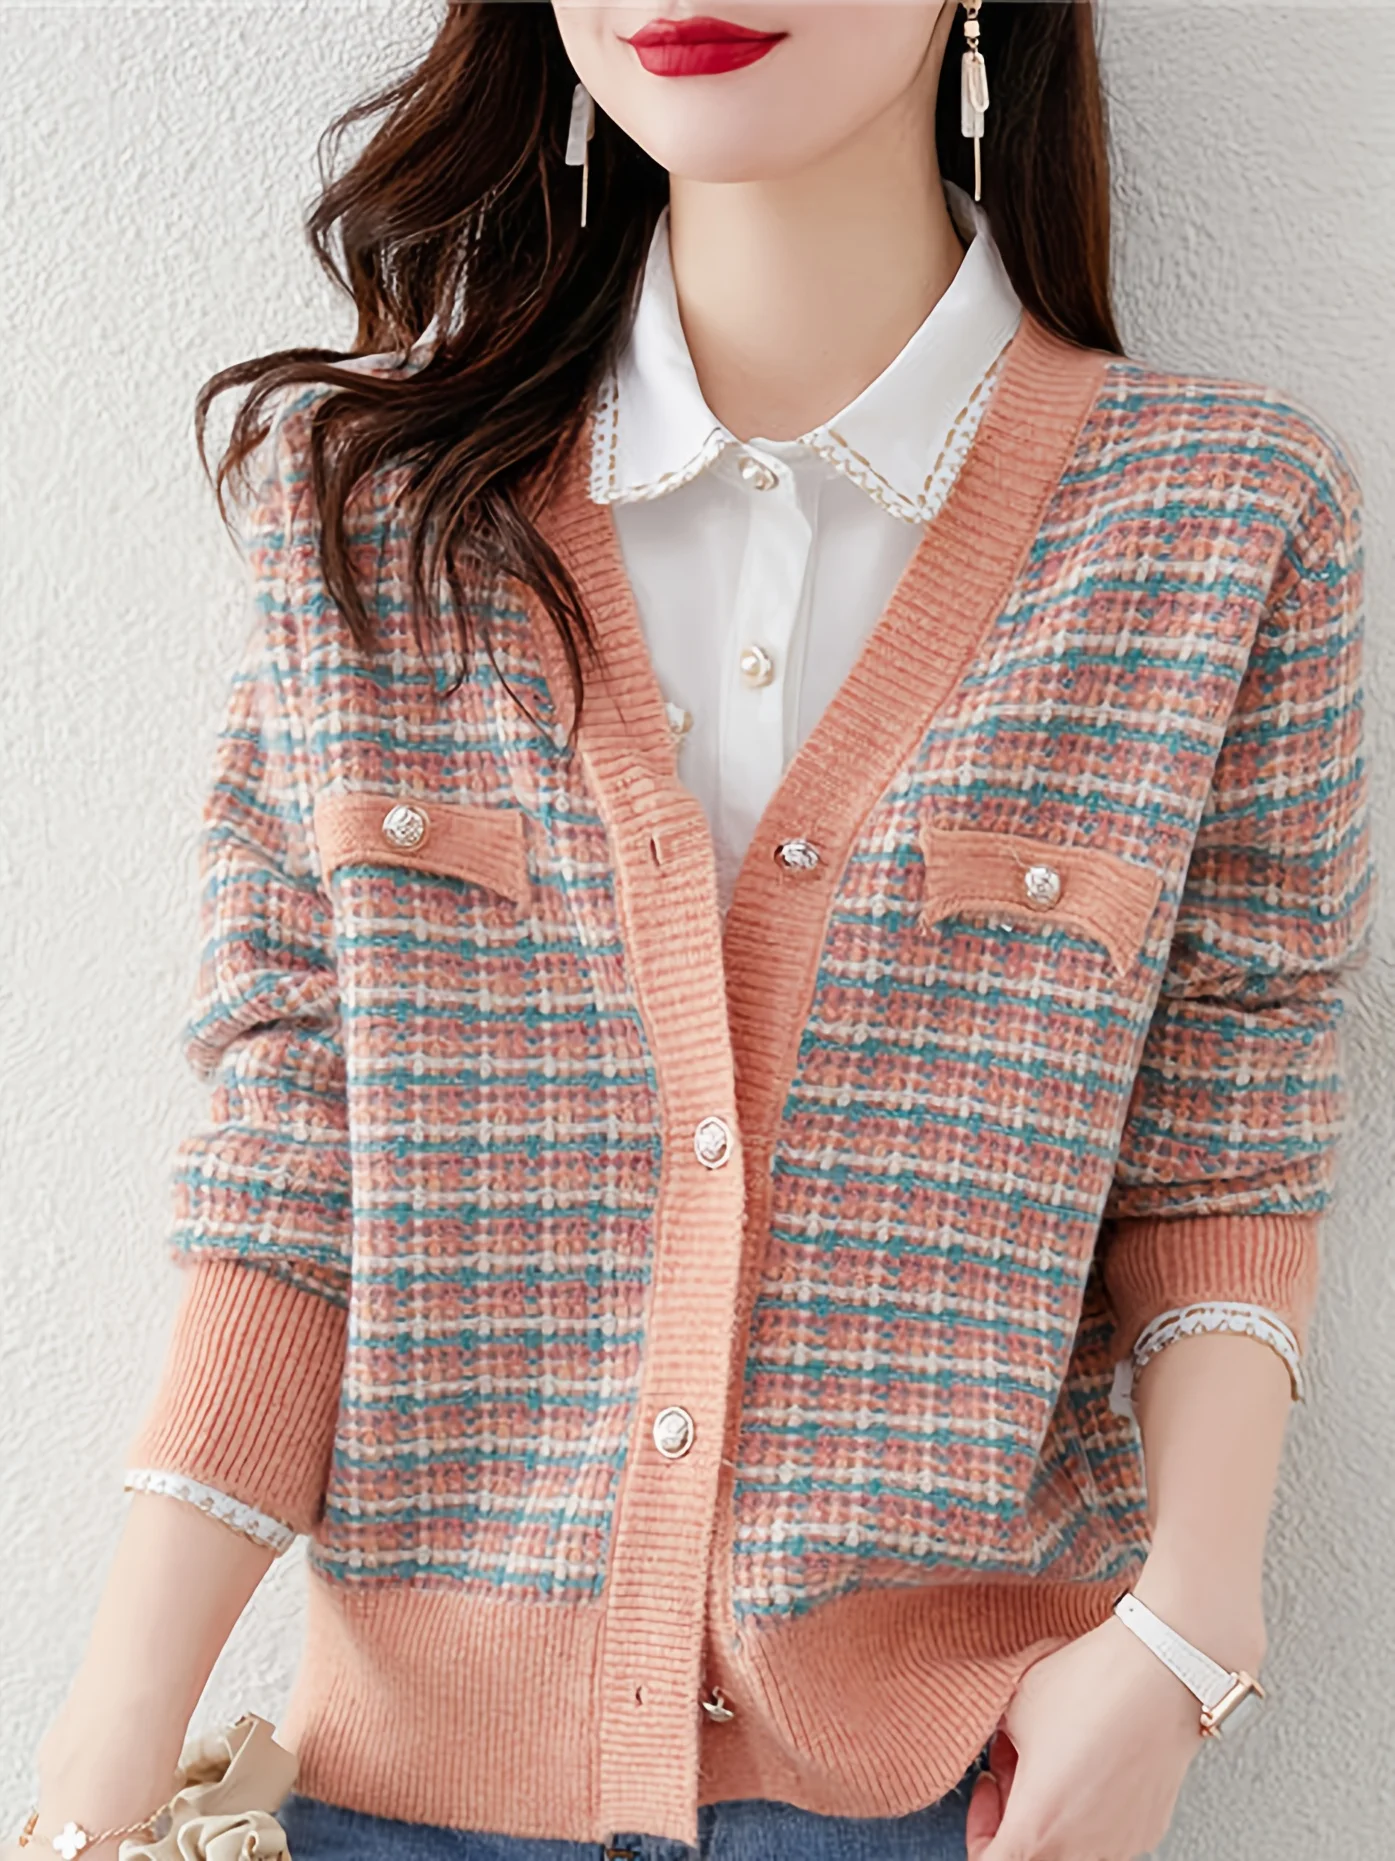 

Women's Knit Cardigan, Pink Check Panel V-neck Knit Cardigan, Women's Sweaters,Cardigans Elegant Tops Knitted Cardigan